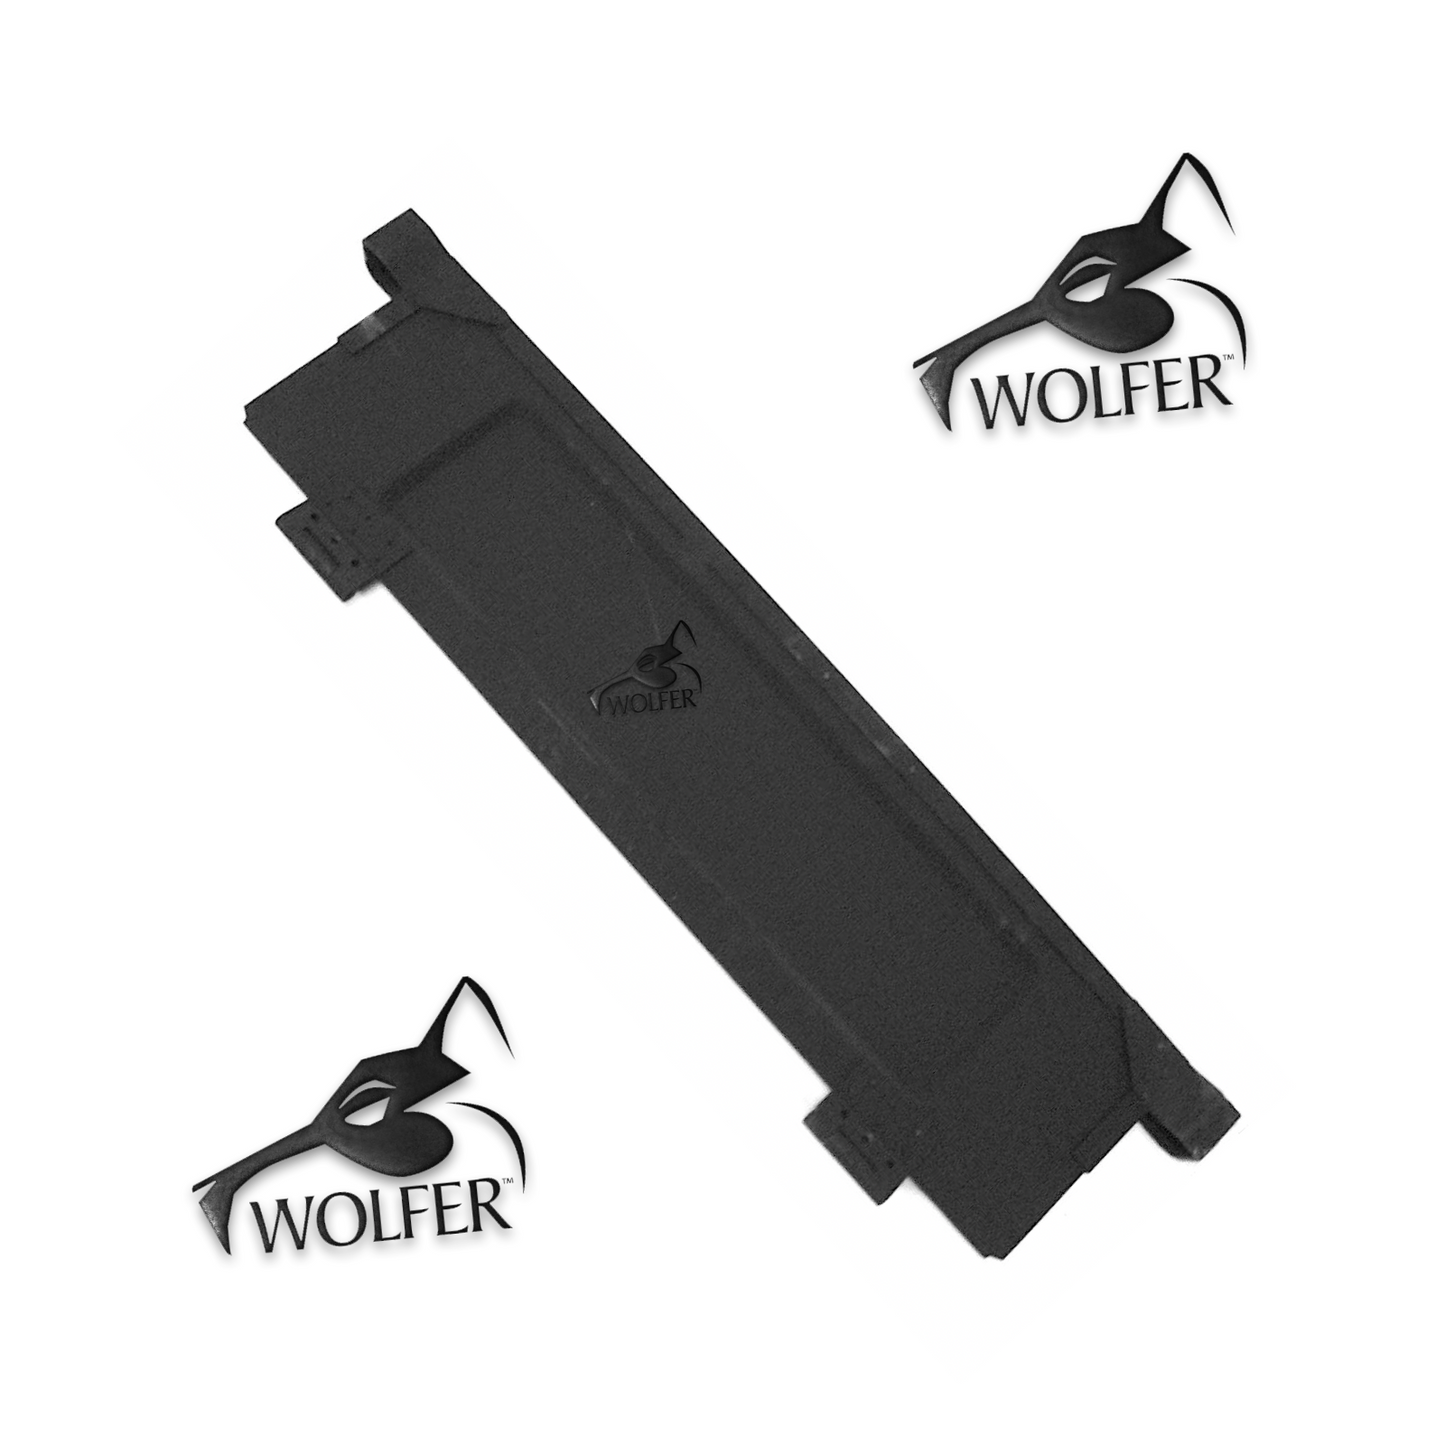 Tailgate Assembly  ;  M998 Hummer Humvee ; 2510011739316  12338981-1  5575698